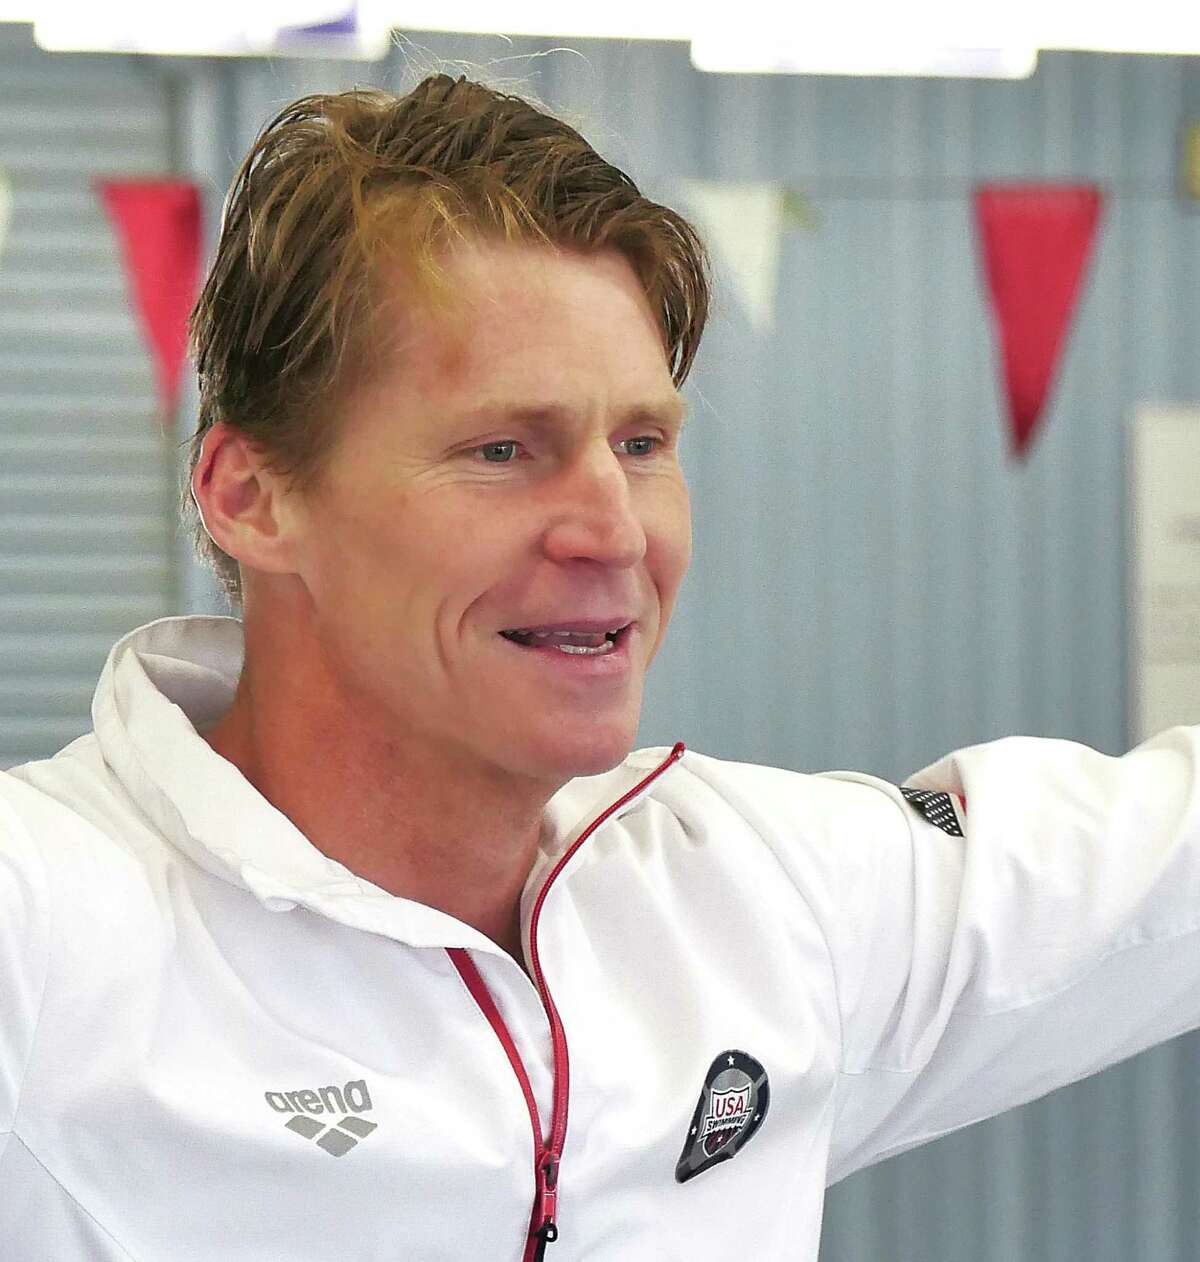 Ex-Olympian Josh Davis will be among the masters meet swimmers competing the next four days.